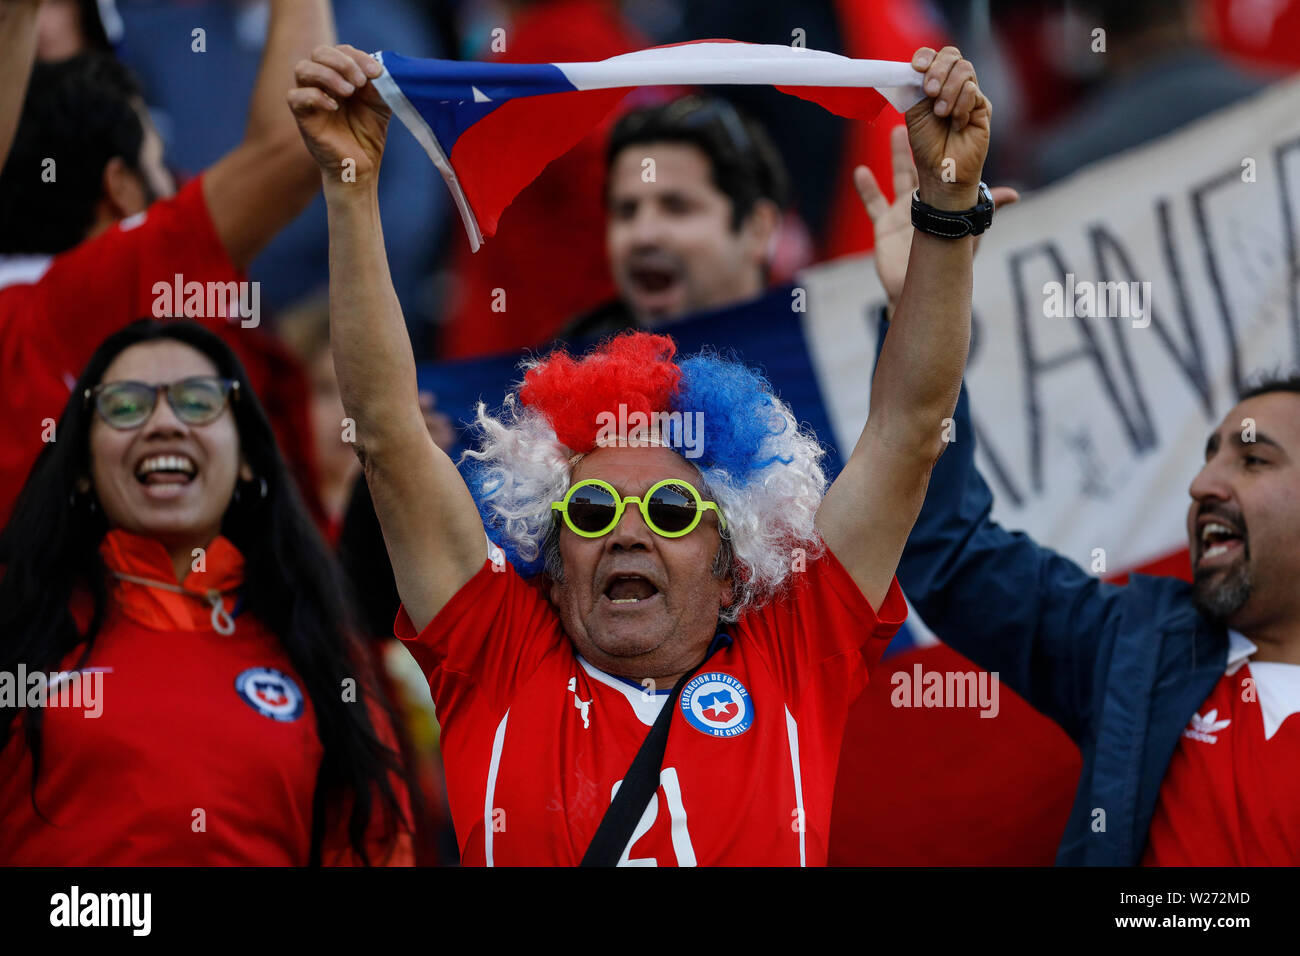 SÃO PAULO, SP - 06.07.2019: ARGENTINA VS. CHILE - Fan during a match between Argentina and Chile, valid for the third place match of Copa América 2019, held this Saturday (06) at the Corinthians Arena in São Paulo, SP. (Photo: Ricardo Moreira/Fotoarena) Stock Photo